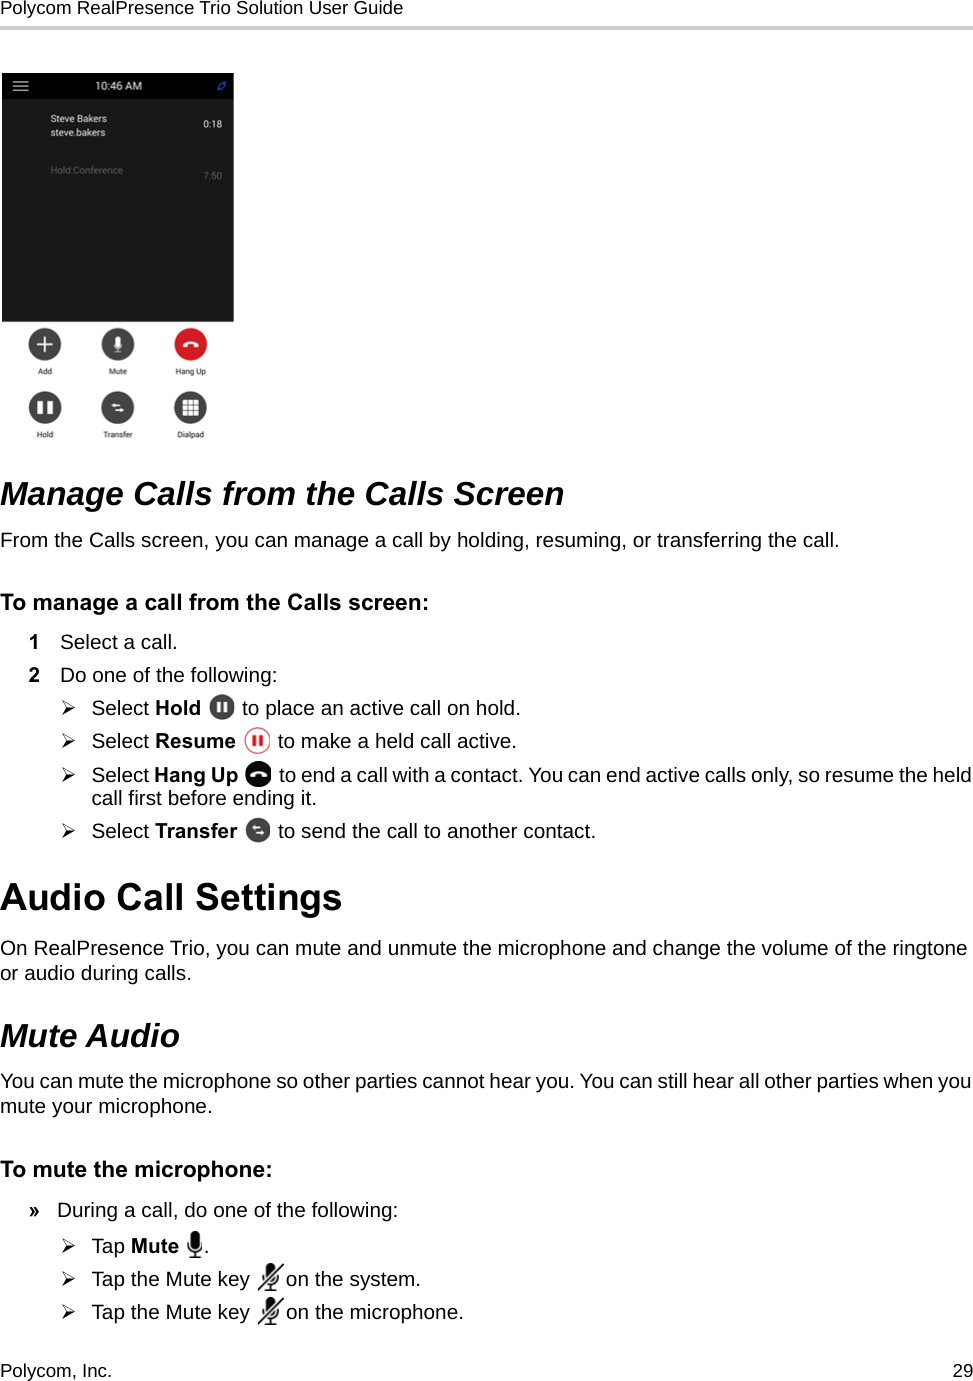 Polycom RealPresence Trio Solution User Guide Polycom, Inc.  29   Manage Calls from the Calls ScreenFrom the Calls screen, you can manage a call by holding, resuming, or transferring the call. To manage a call from the Calls screen:1Select a call. 2Do one of the following:Select Hold   to place an active call on hold.Select Resume   to make a held call active.Select Hang Up   to end a call with a contact. You can end active calls only, so resume the held call first before ending it.Select Transfer   to send the call to another contact.Audio Call Settings On RealPresence Trio, you can mute and unmute the microphone and change the volume of the ringtone or audio during calls. Mute AudioYou can mute the microphone so other parties cannot hear you. You can still hear all other parties when you mute your microphone.To mute the microphone:»During a call, do one of the following:Tap Mute .Tap the Mute key  on the system. Tap the Mute key  on the microphone. 